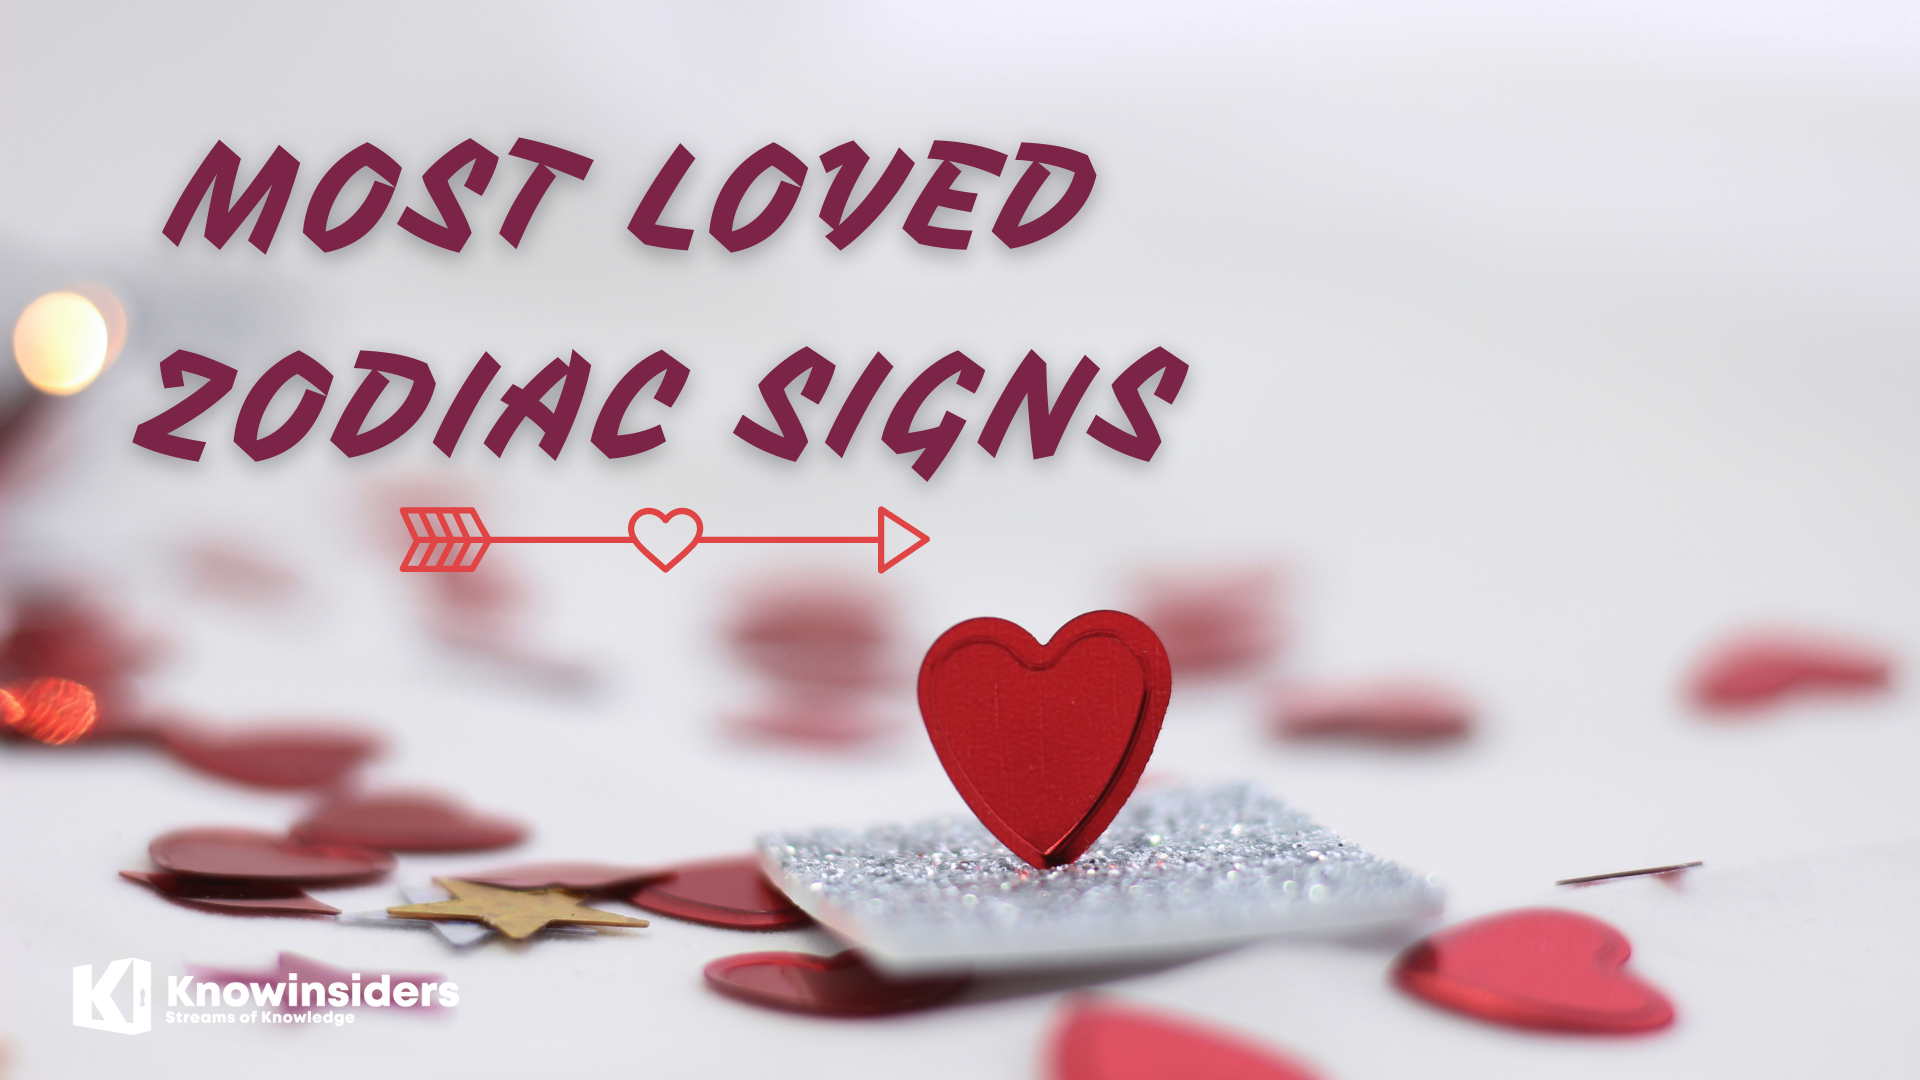 Top 5 Most Loved Zodiac Signs According to Astrology